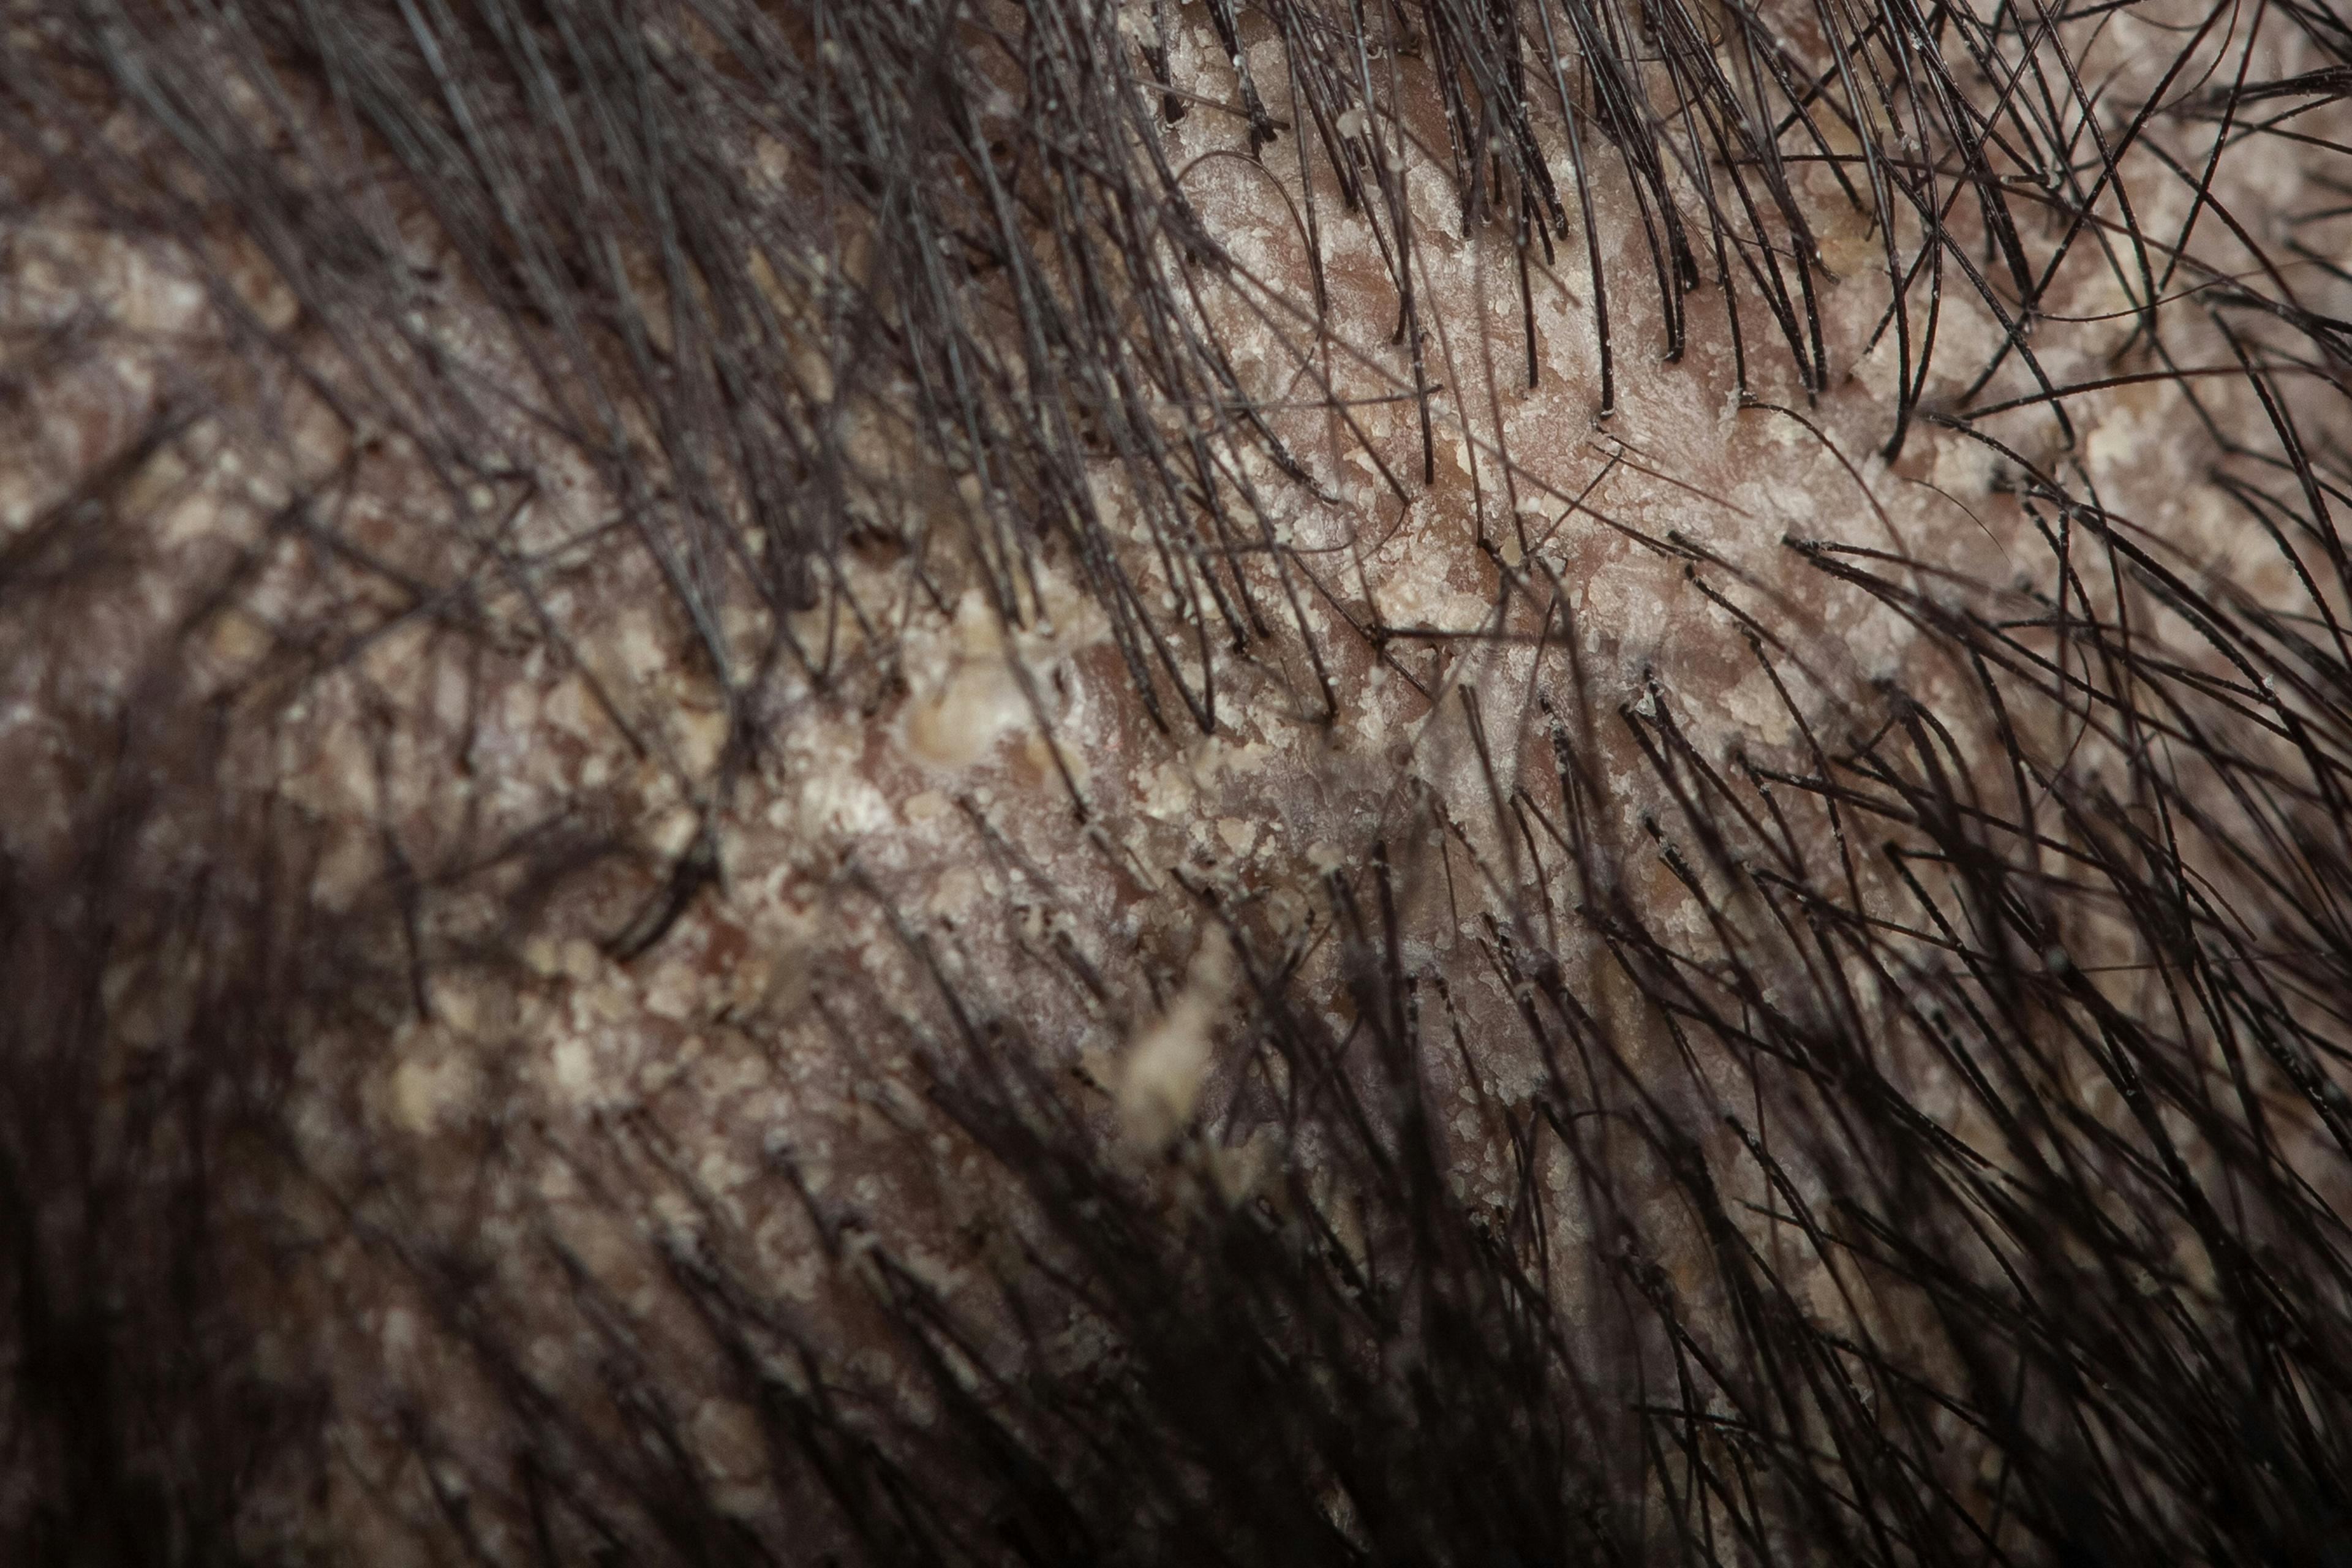 Expert Panel Confirms Efficacy and Safety of Roflumilast Topical Foam for Seborrheic Dermatitis Across Diverse Hair Types